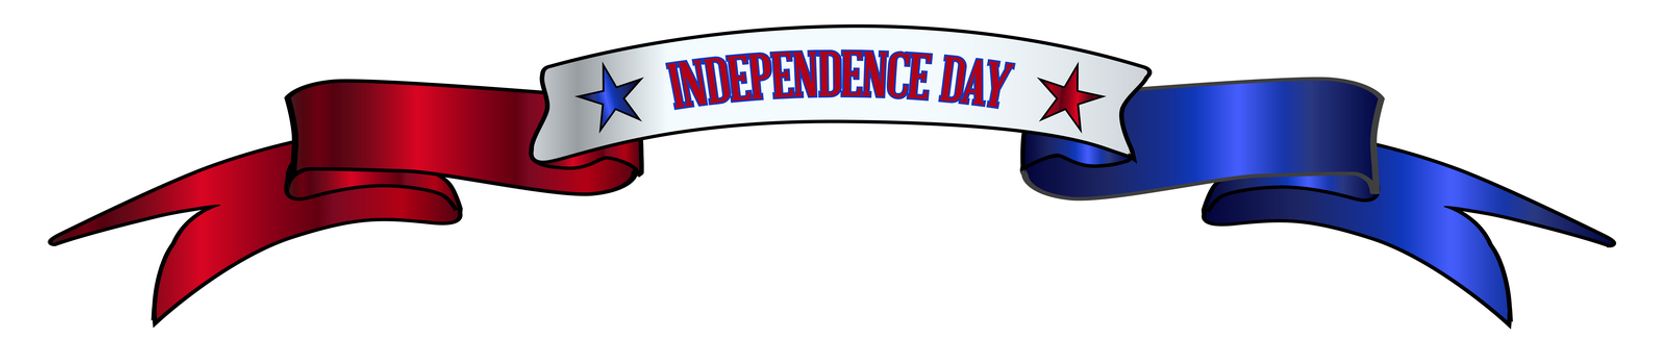 A red white and blue satin or silk ribbon banner with the text Independence Day and stars